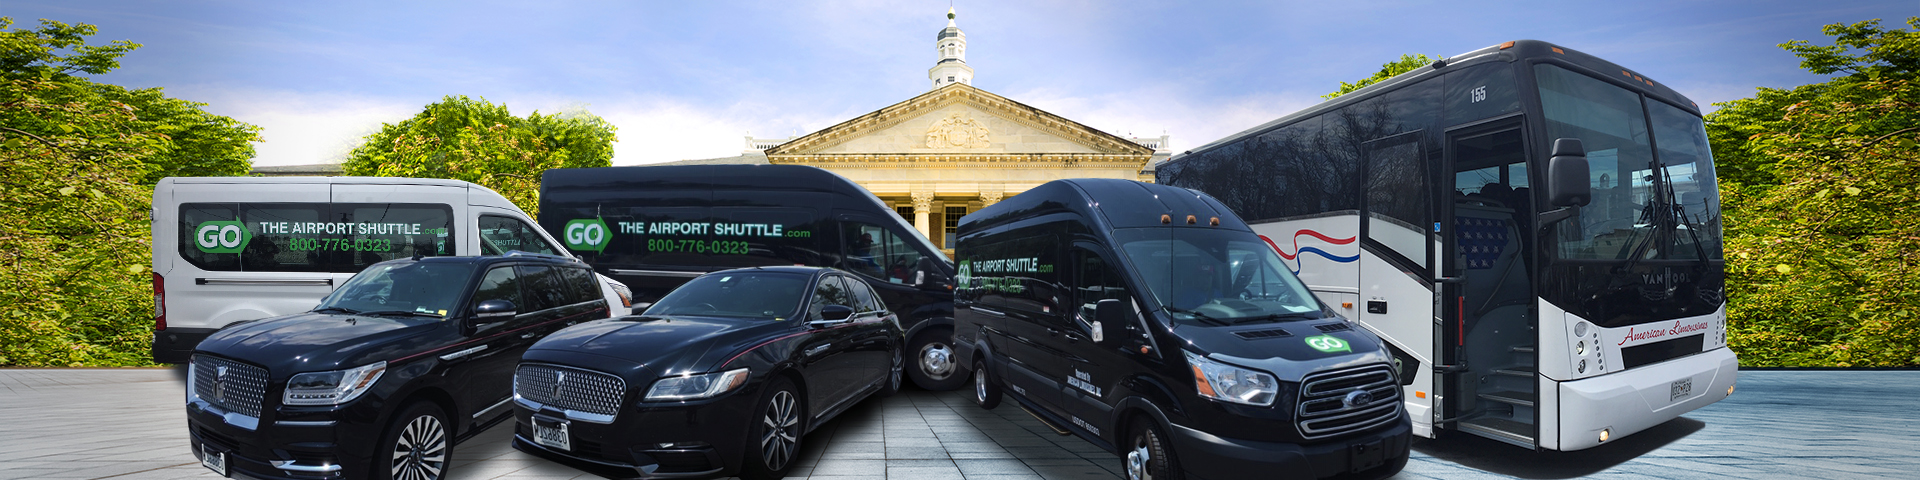 image of fleet of limos on The Airport Shuttle website